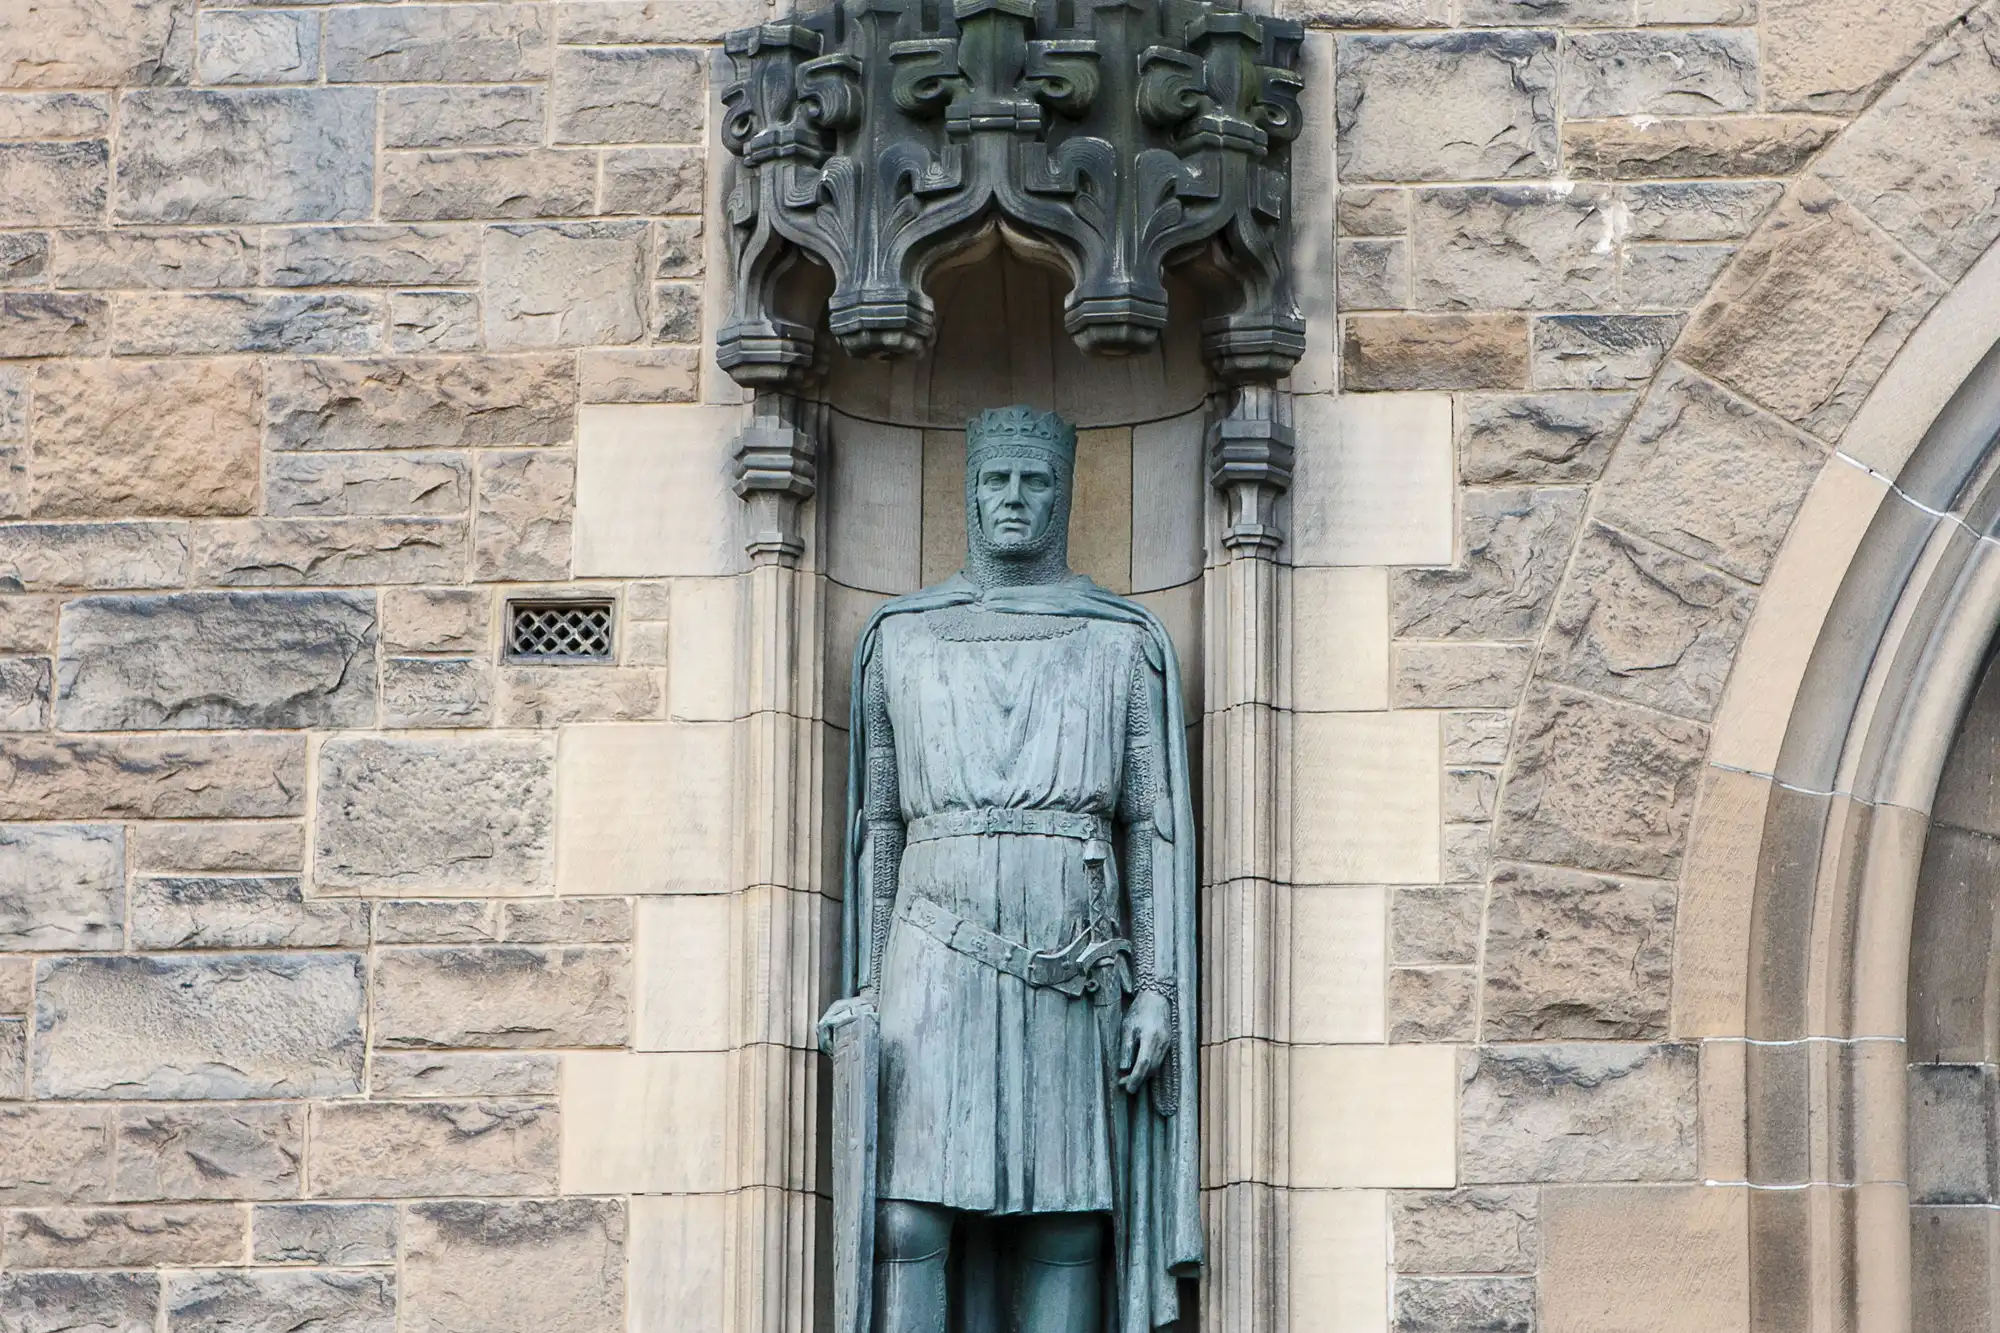 Stone statue of a medieval knight in full armor, set into a niche with ornate gothic architectural details on a stone wall.